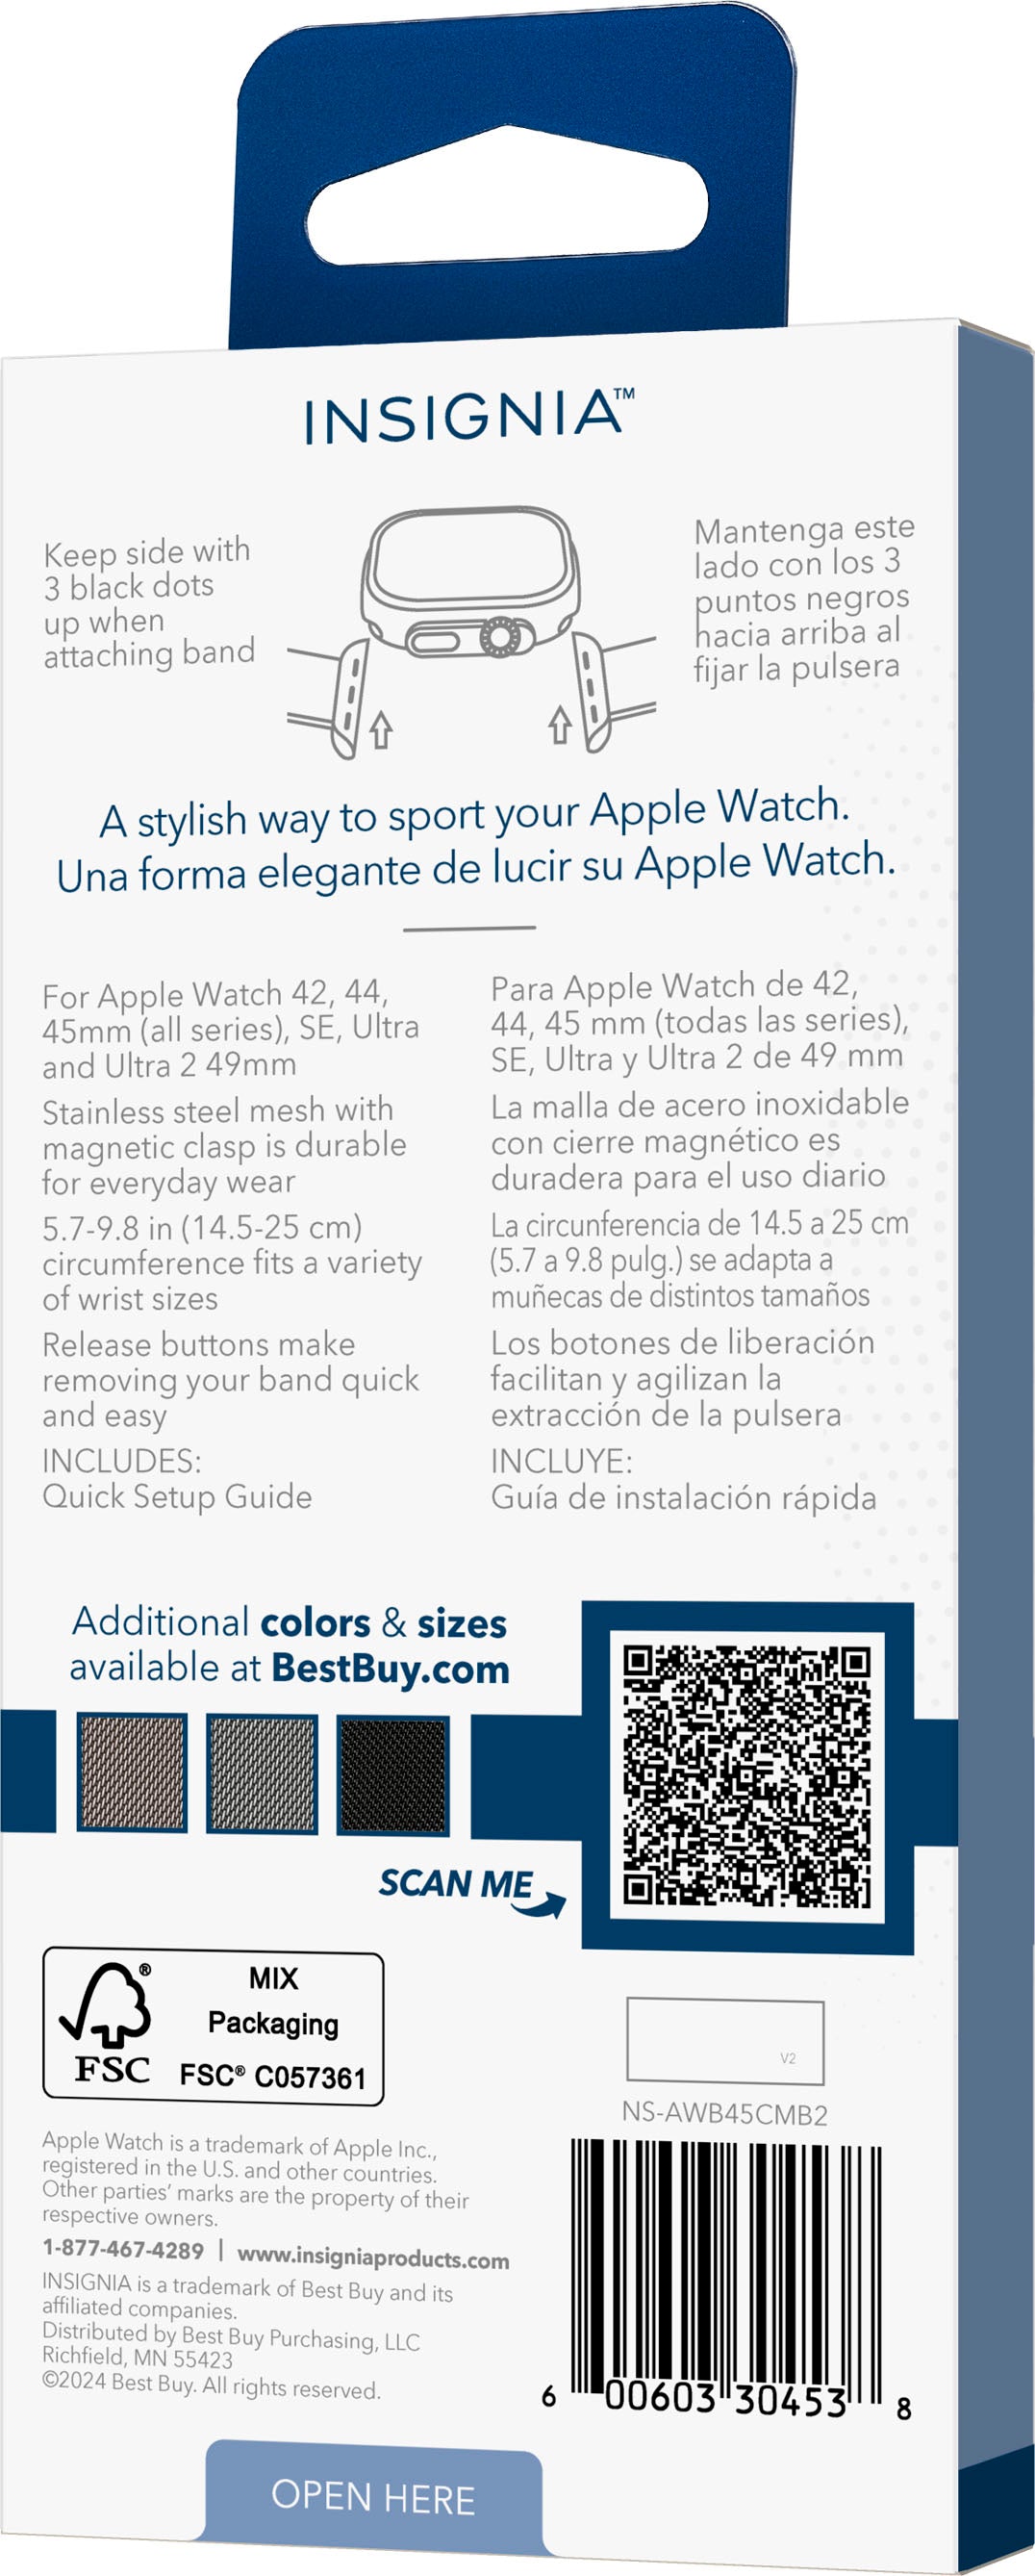 Insignia™ - Stainless Steel Mesh Band for Apple Watch 42mm, 44mm, 45mm, SE, Ultra 49mm and Ultra 2 49mm - Champagne_8